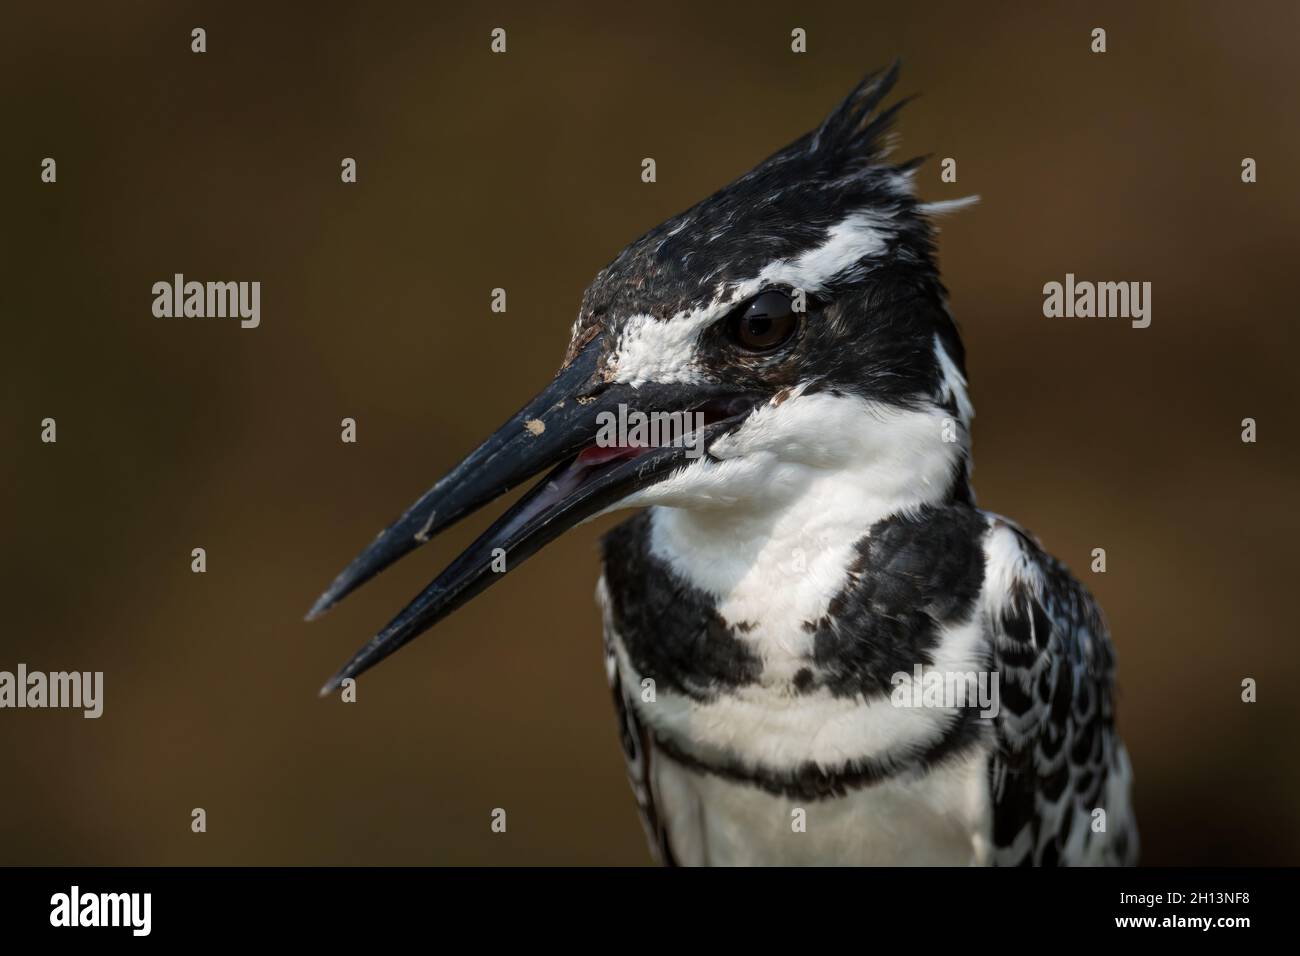 Pied Kingfisher  - Ceryle rudis, beautiful large kingfisher from African mangroves and rivers, Uganda. Stock Photo